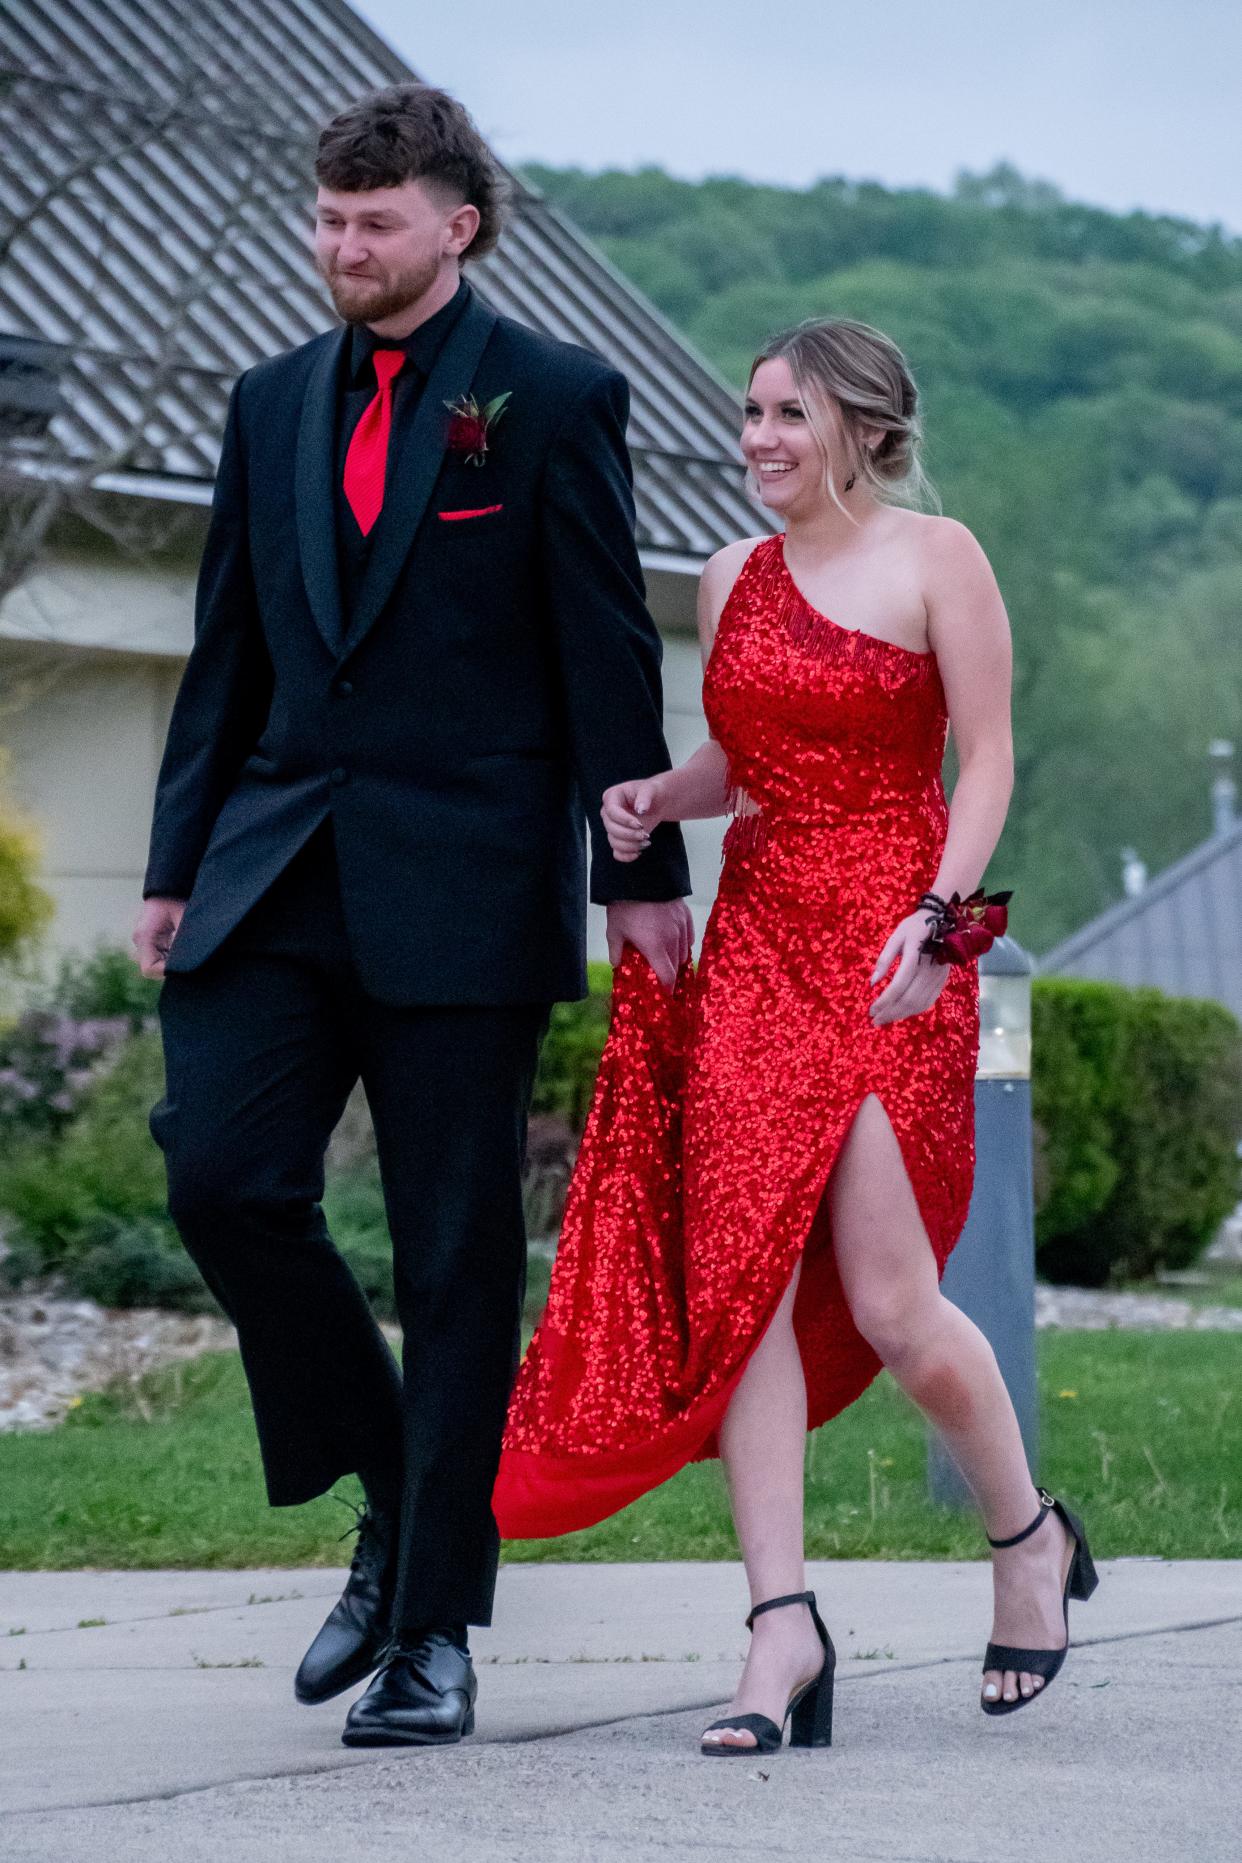 Shenandoah High School celebrated prom on Saturday, May 4 at the Pritchard Laughlin Civic Center with a Gatsby-inspired evening.